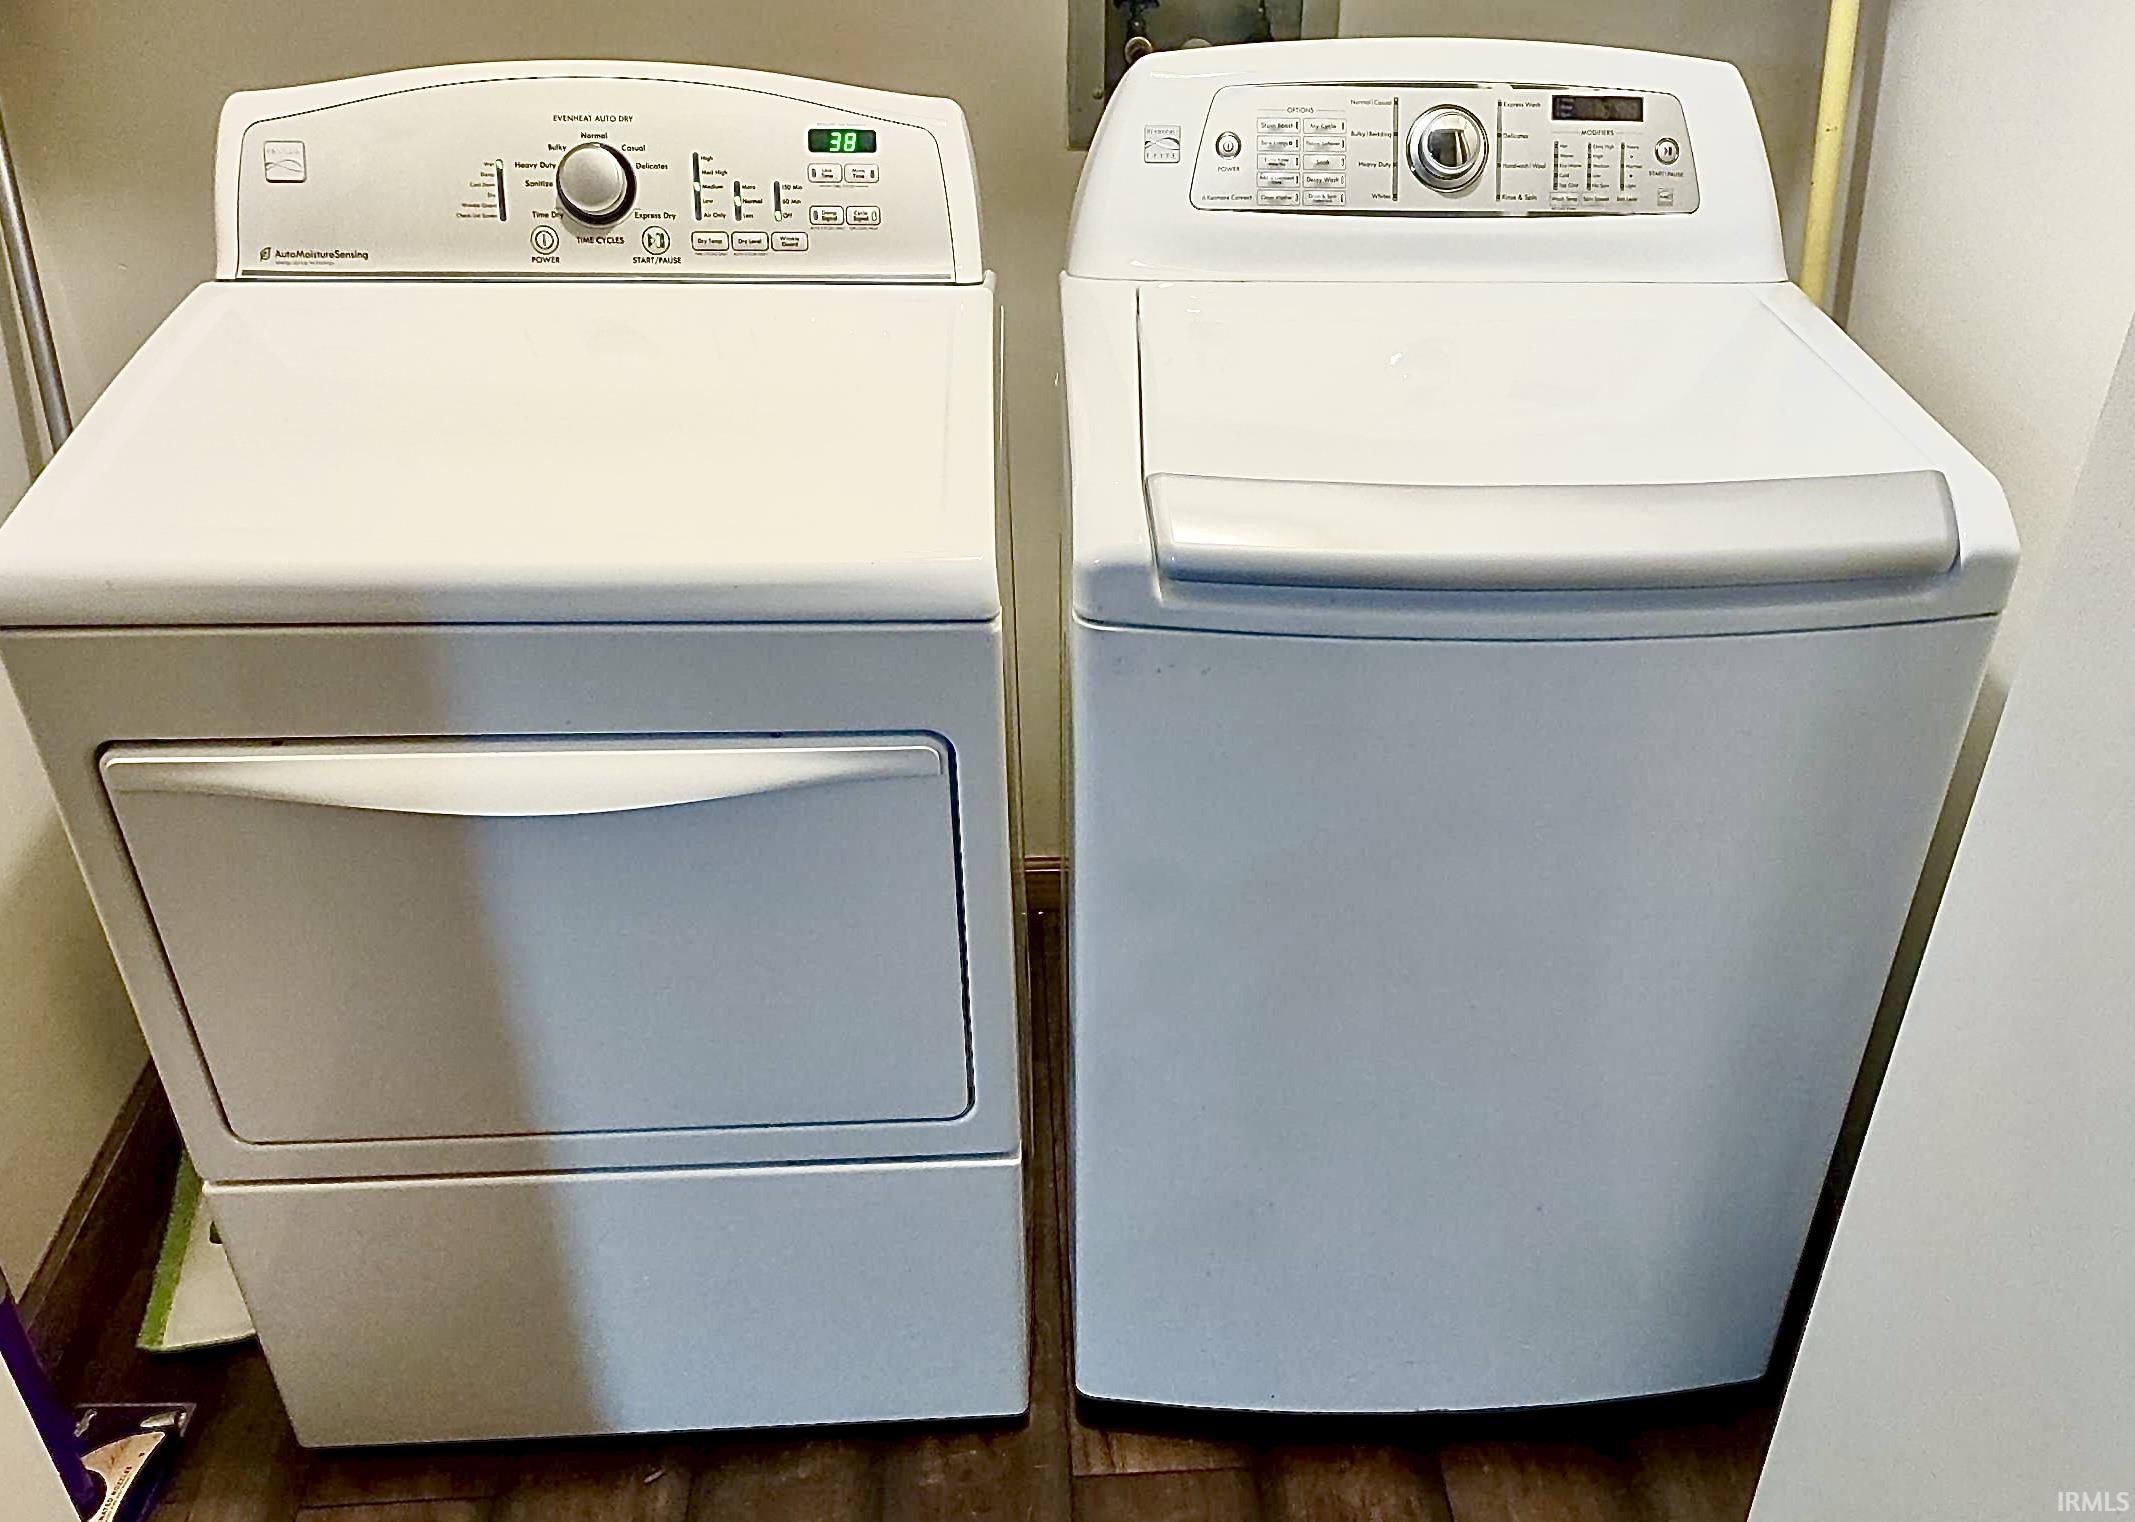 Washer and Dryer that will be swapped out and stay with the home.